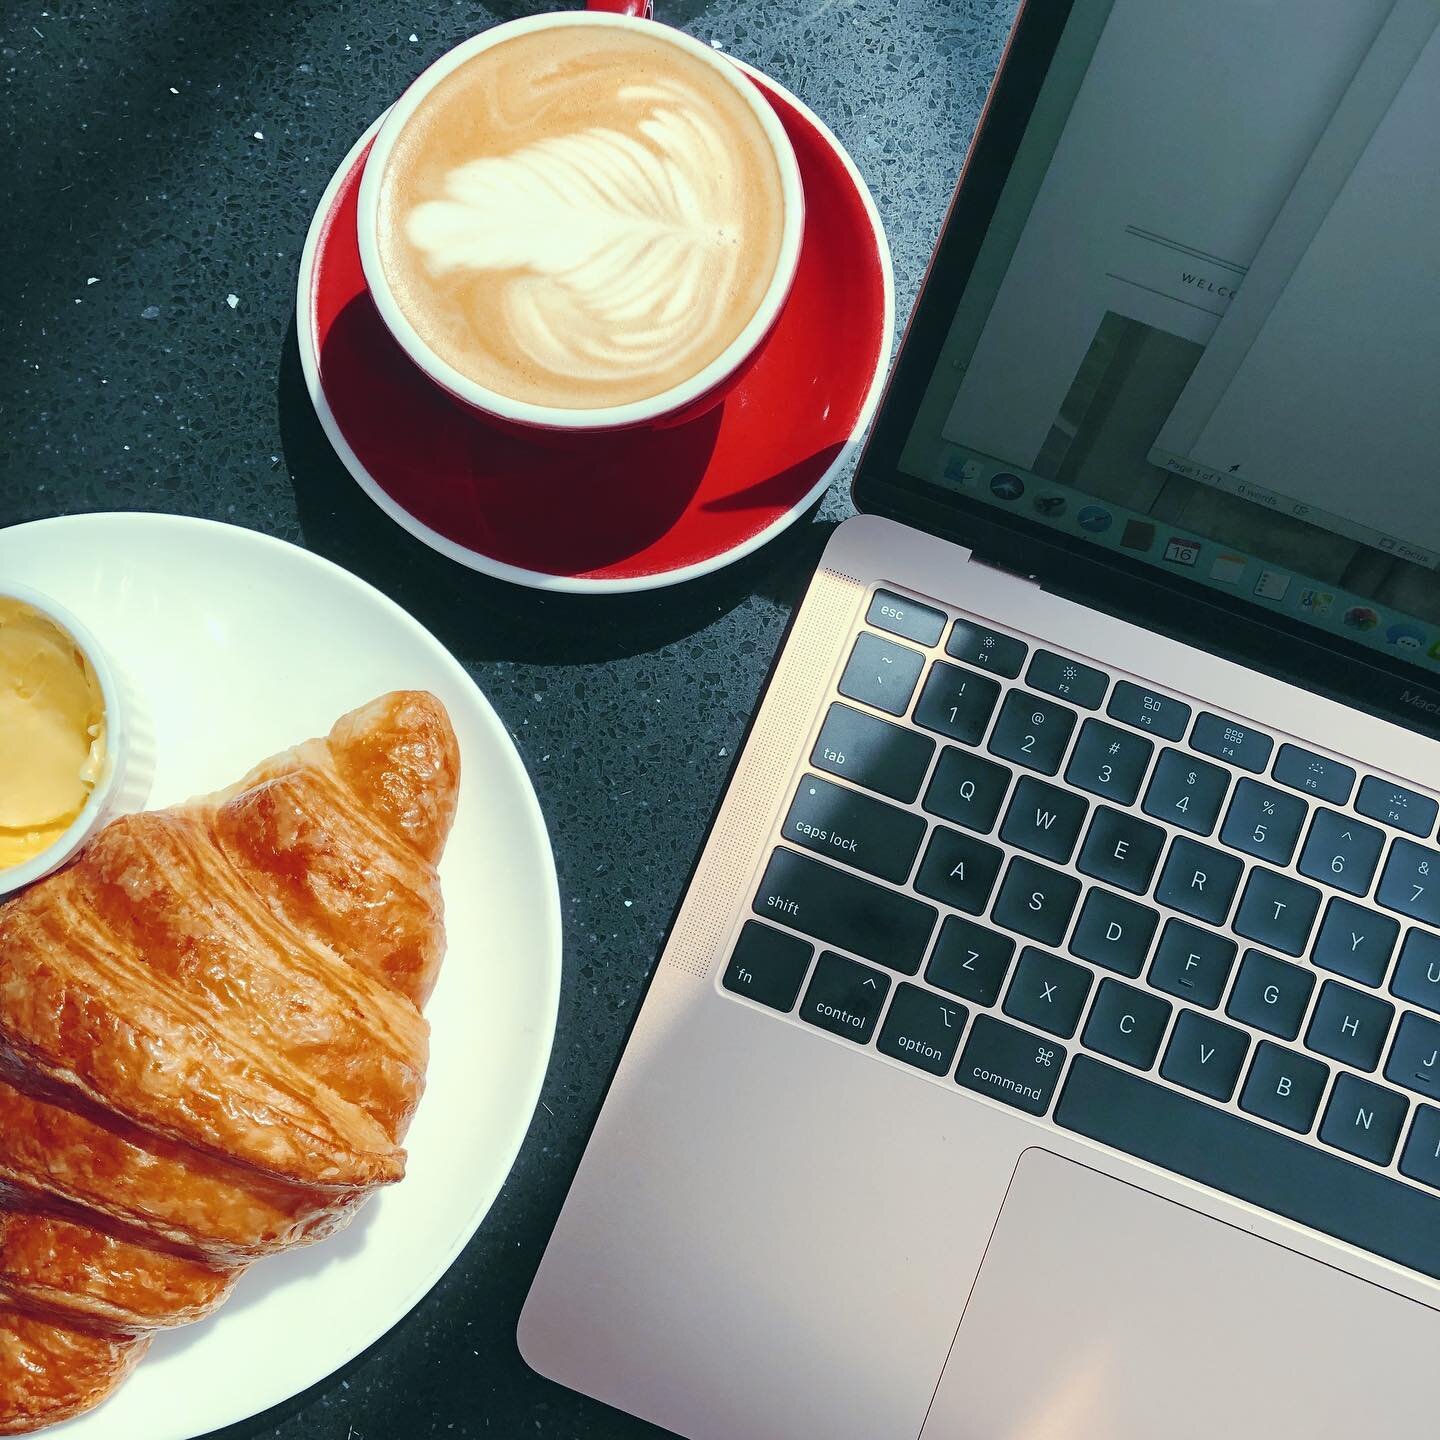 I know, I know, this photo is so ringarde but these are the little moments we must celebrate:
The morning sun after days of rain. A croissant and a cappuccino to enjoy with no toddlers to plead for crumbs. A pocket of time to write, to weave thoughts